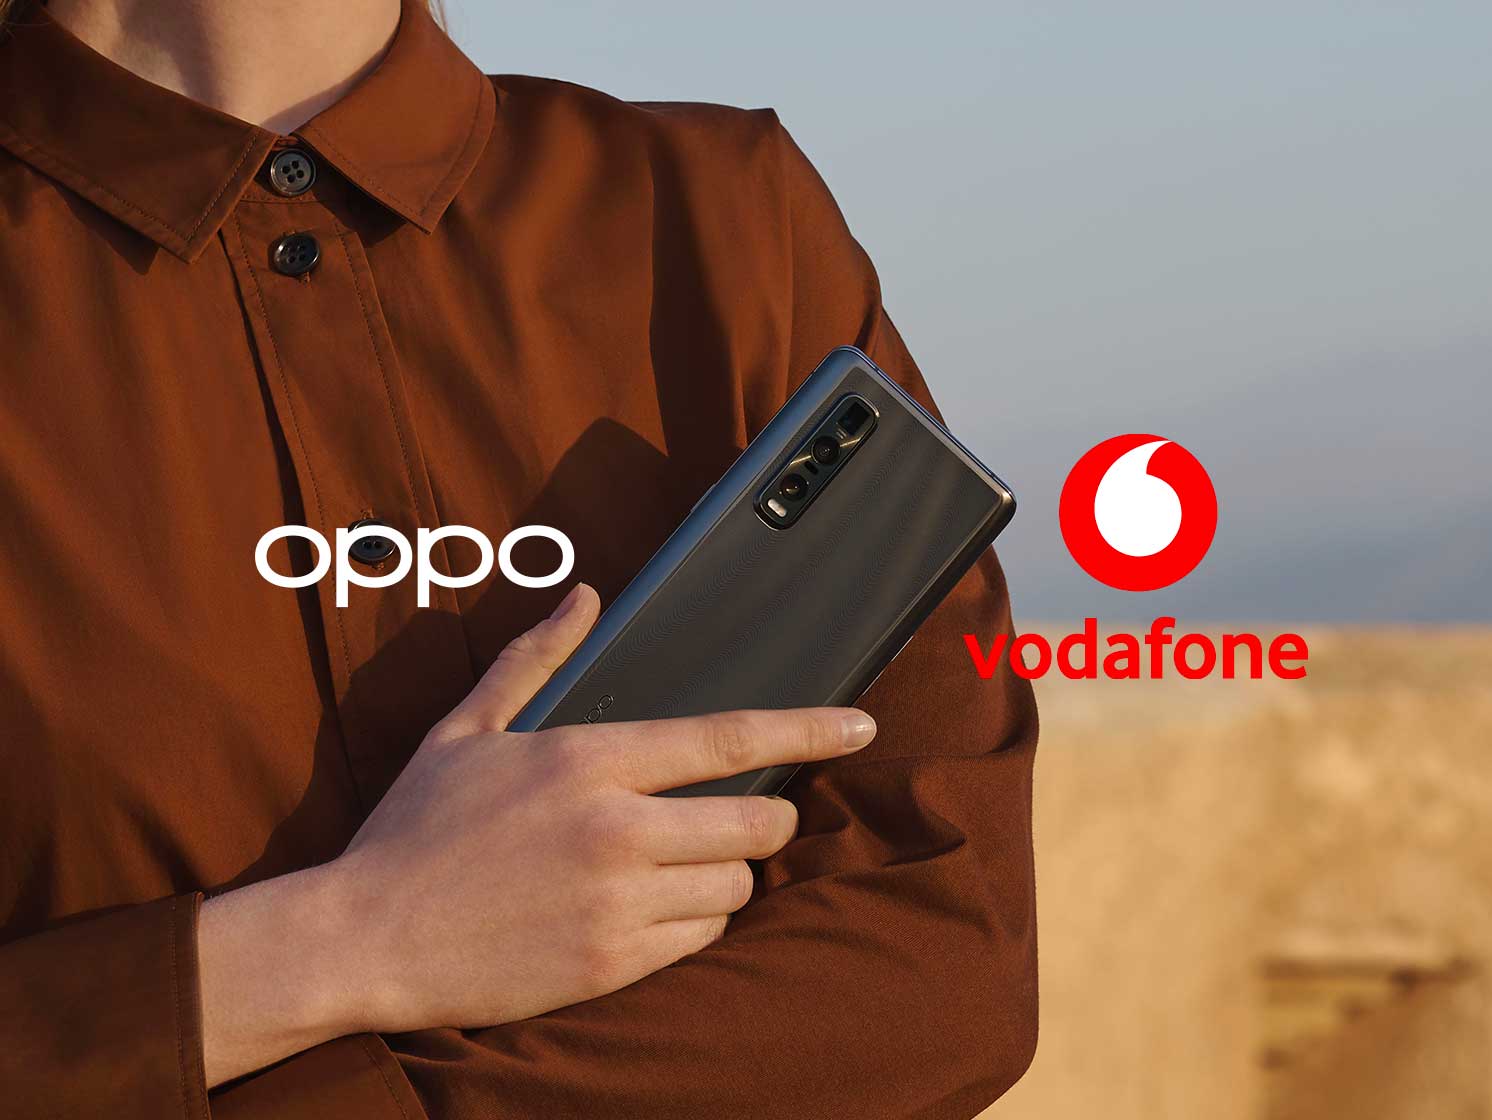 OPPO and Vodafone Announce Partnership Agreement to Bring a Broad Range of OPPO Products to Vodafone's European Markets